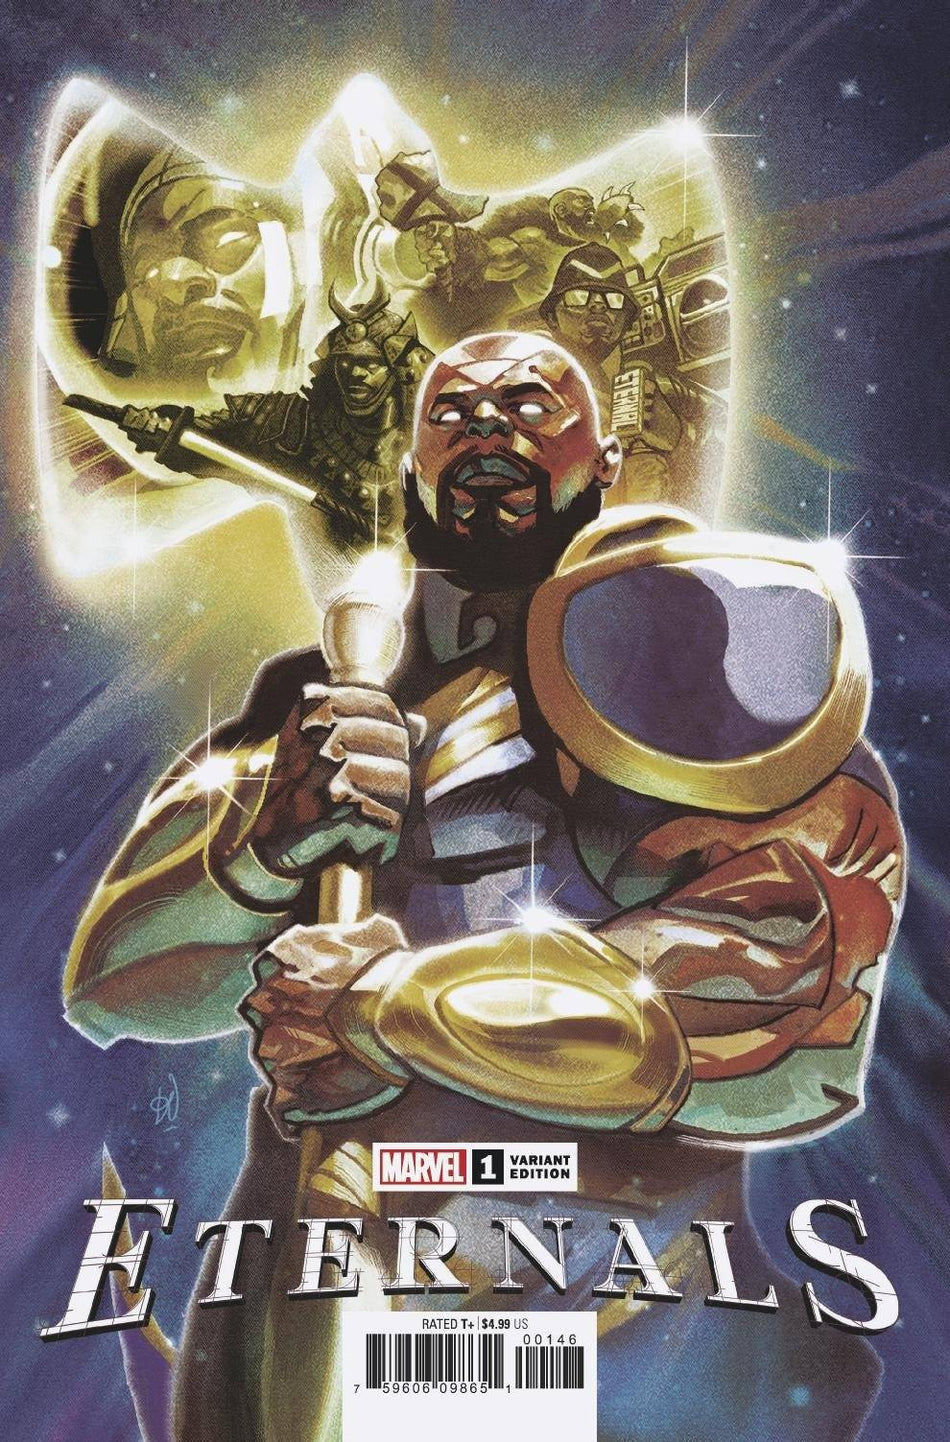 Photo of Eternals Issue 1 Del Mundo Var comic sold by Stronghold Collectibles